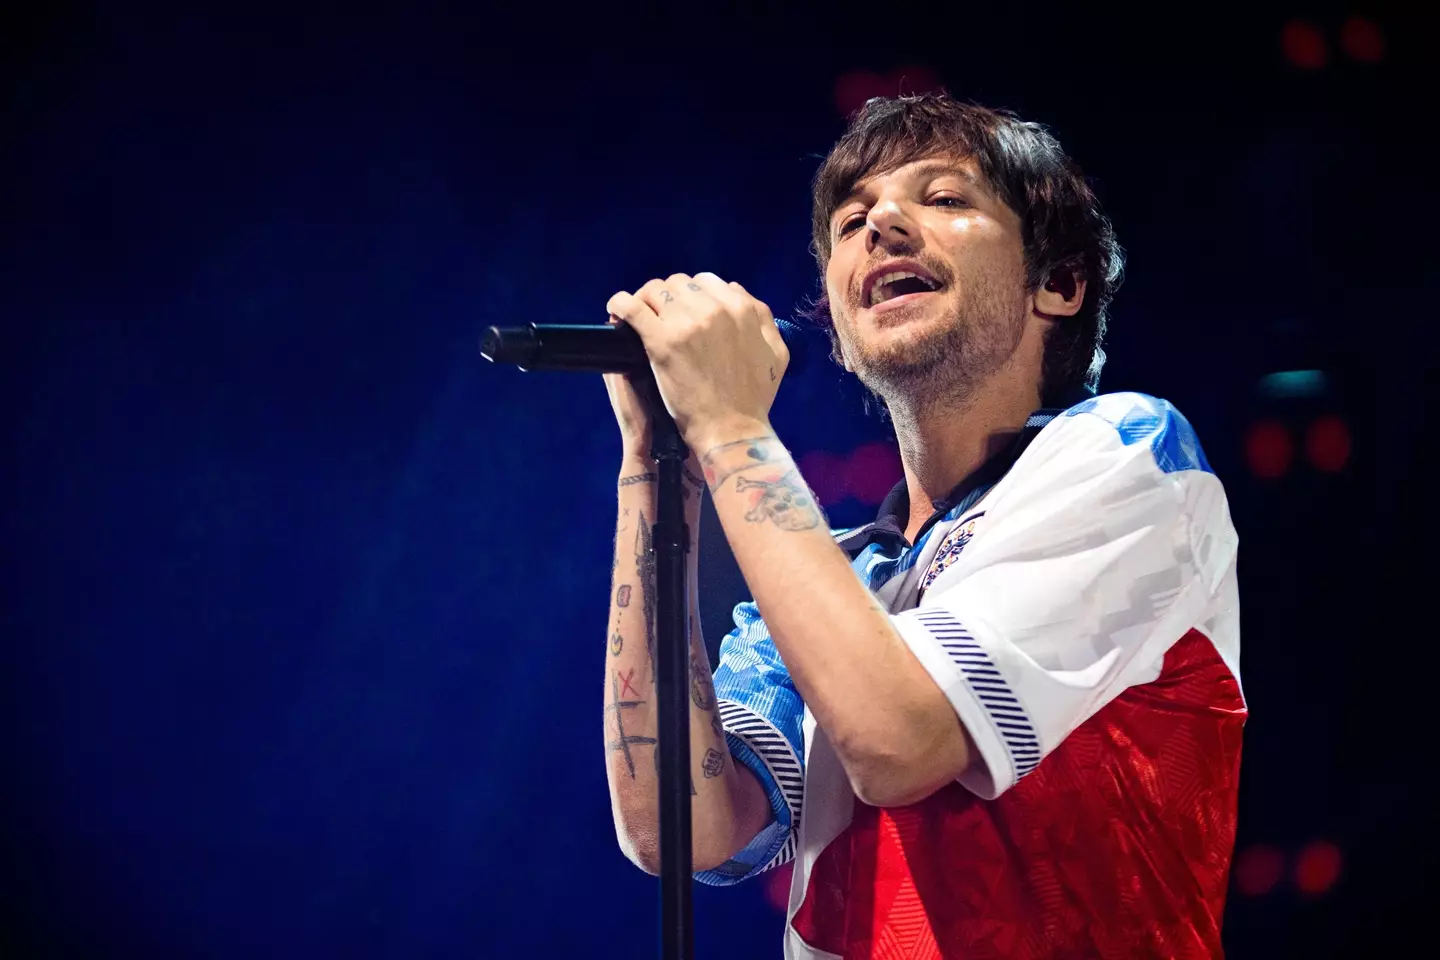 Tomlinson was initially reluctant to launch a solo career after One Direction split up.